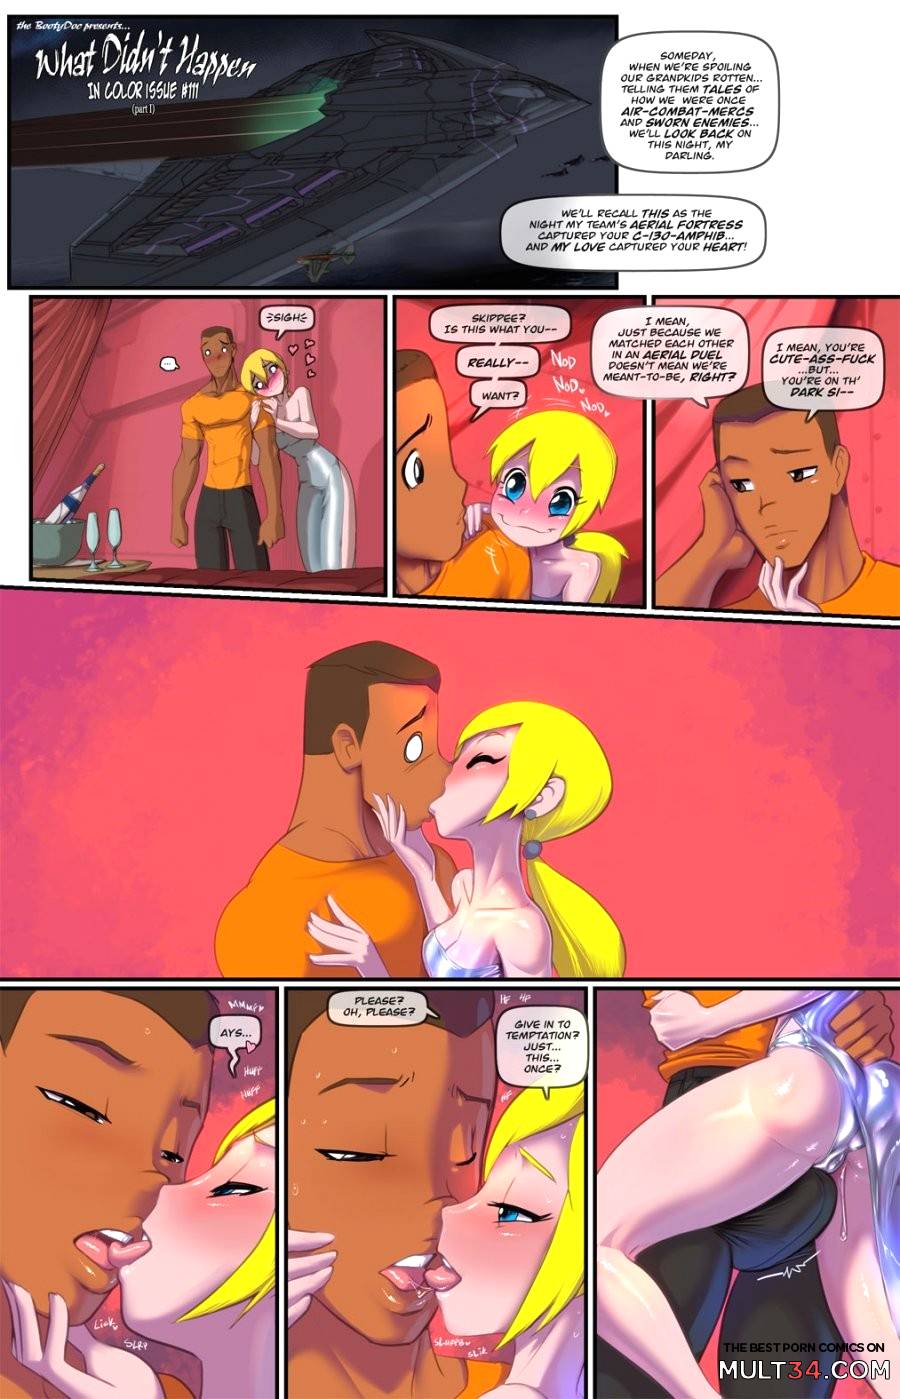 What Didn't Happen (Ongoing) page 1